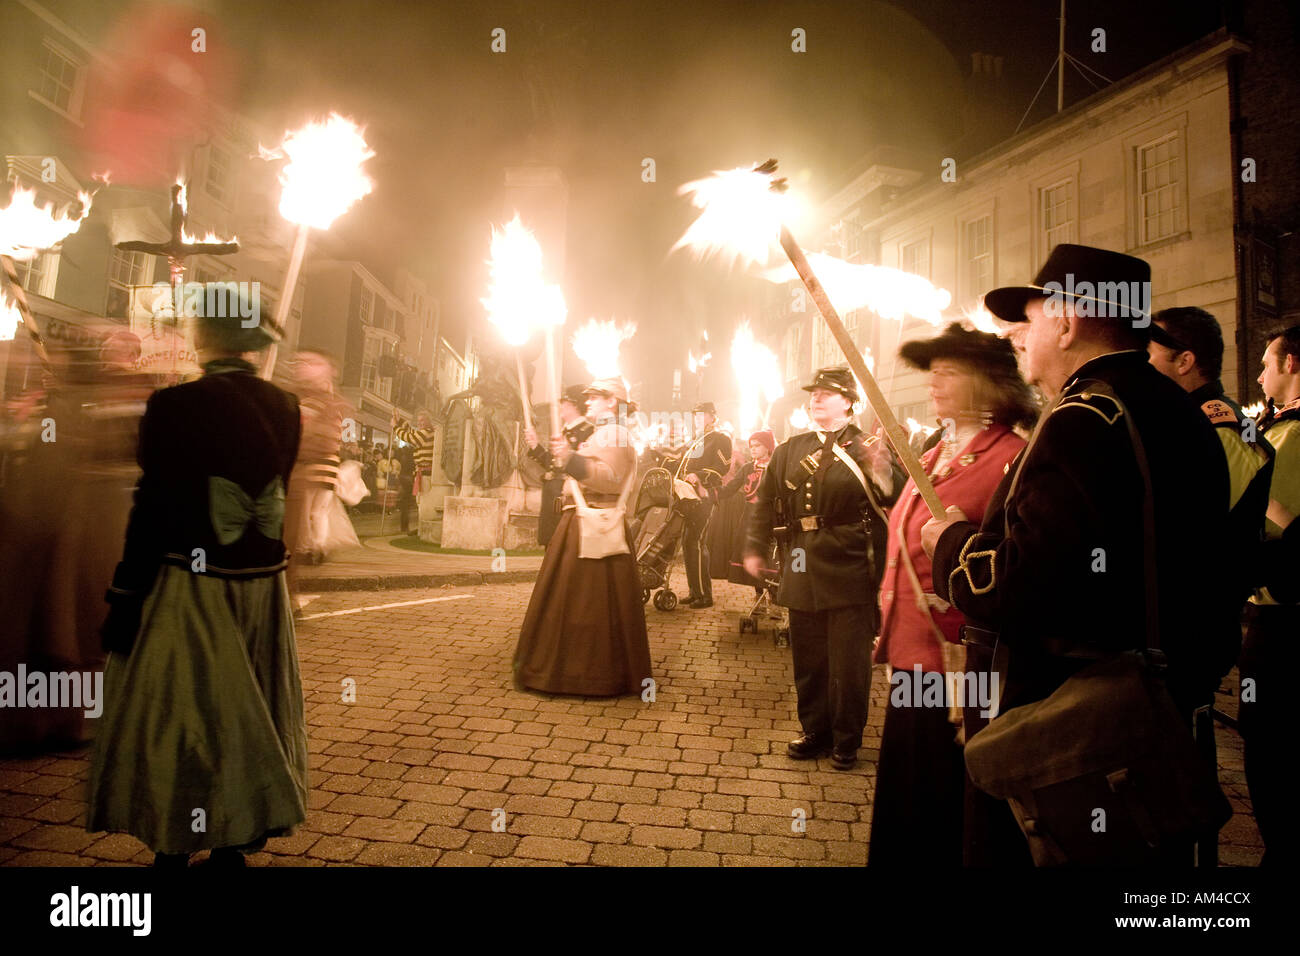 Torchlight procession At The Lewes Fire Festival Sussex UK Europe Stock Photo